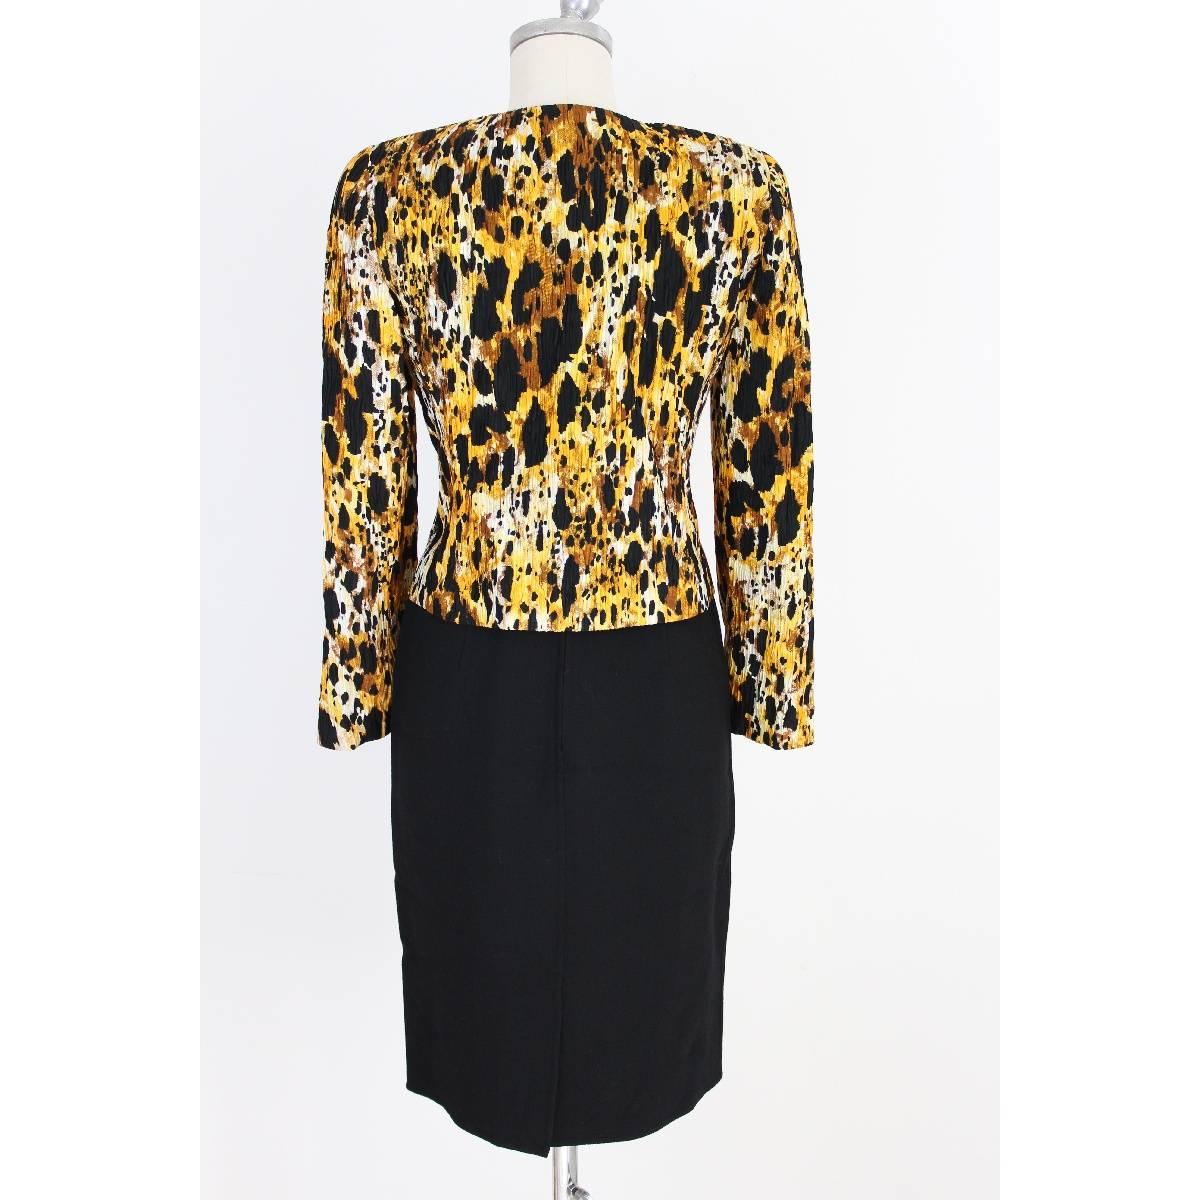 Mila Schon vintage silk skirt suit dress. Women’s 1980s in silk and acetate the jacket, 100% wool the skirt. Animalier theme very rare, size 42 made in italy. New without tag

Size 42 It 8 Us 10 Uk

Shoulders: 42 cm
Chest / Bust: 46 cm
Sleeves: 59